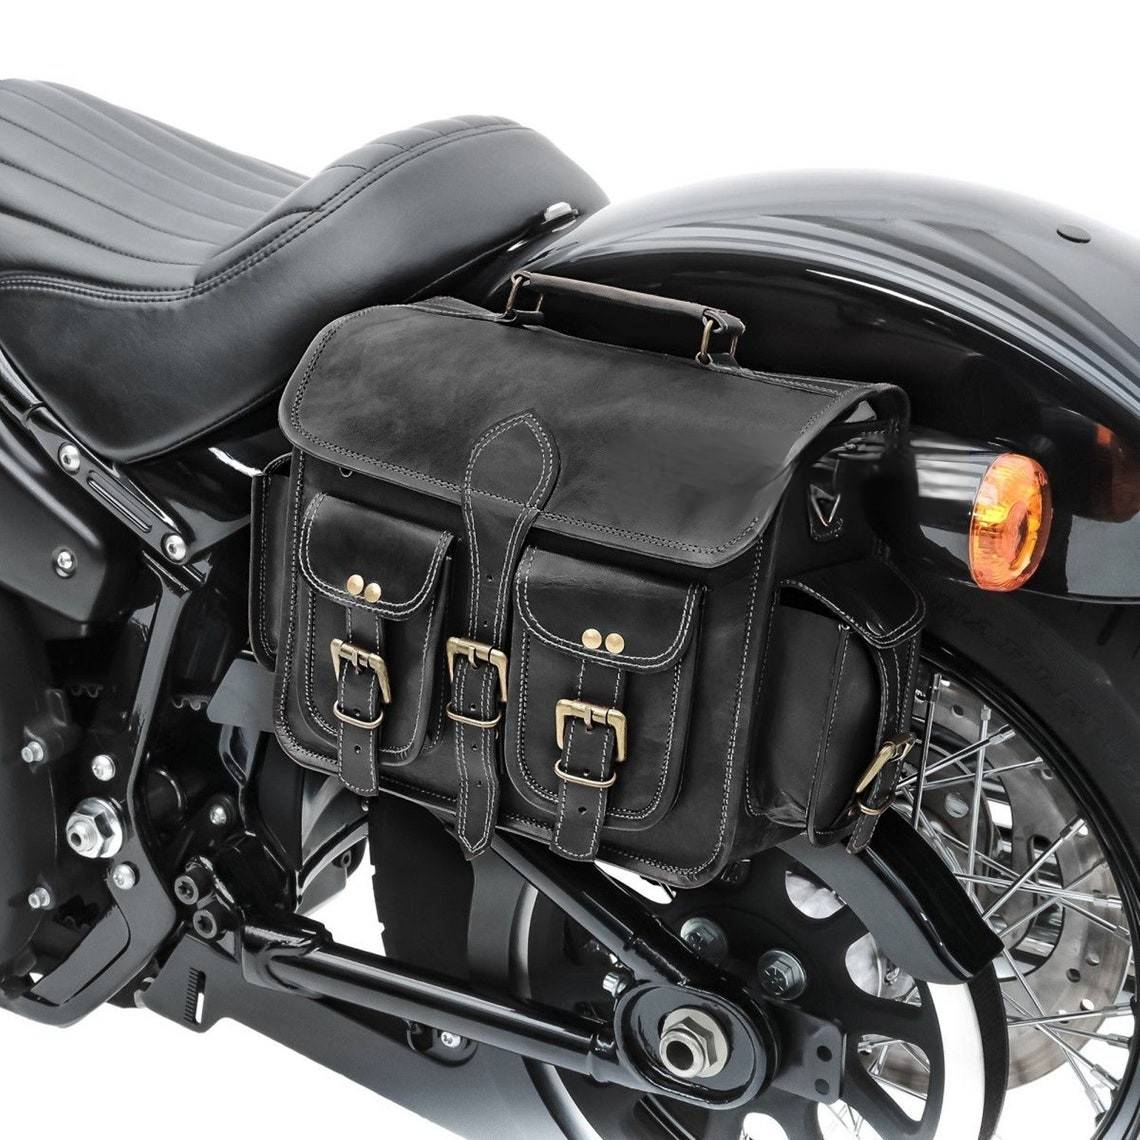 Motorcycle luggage reviews with prices and honest opinions